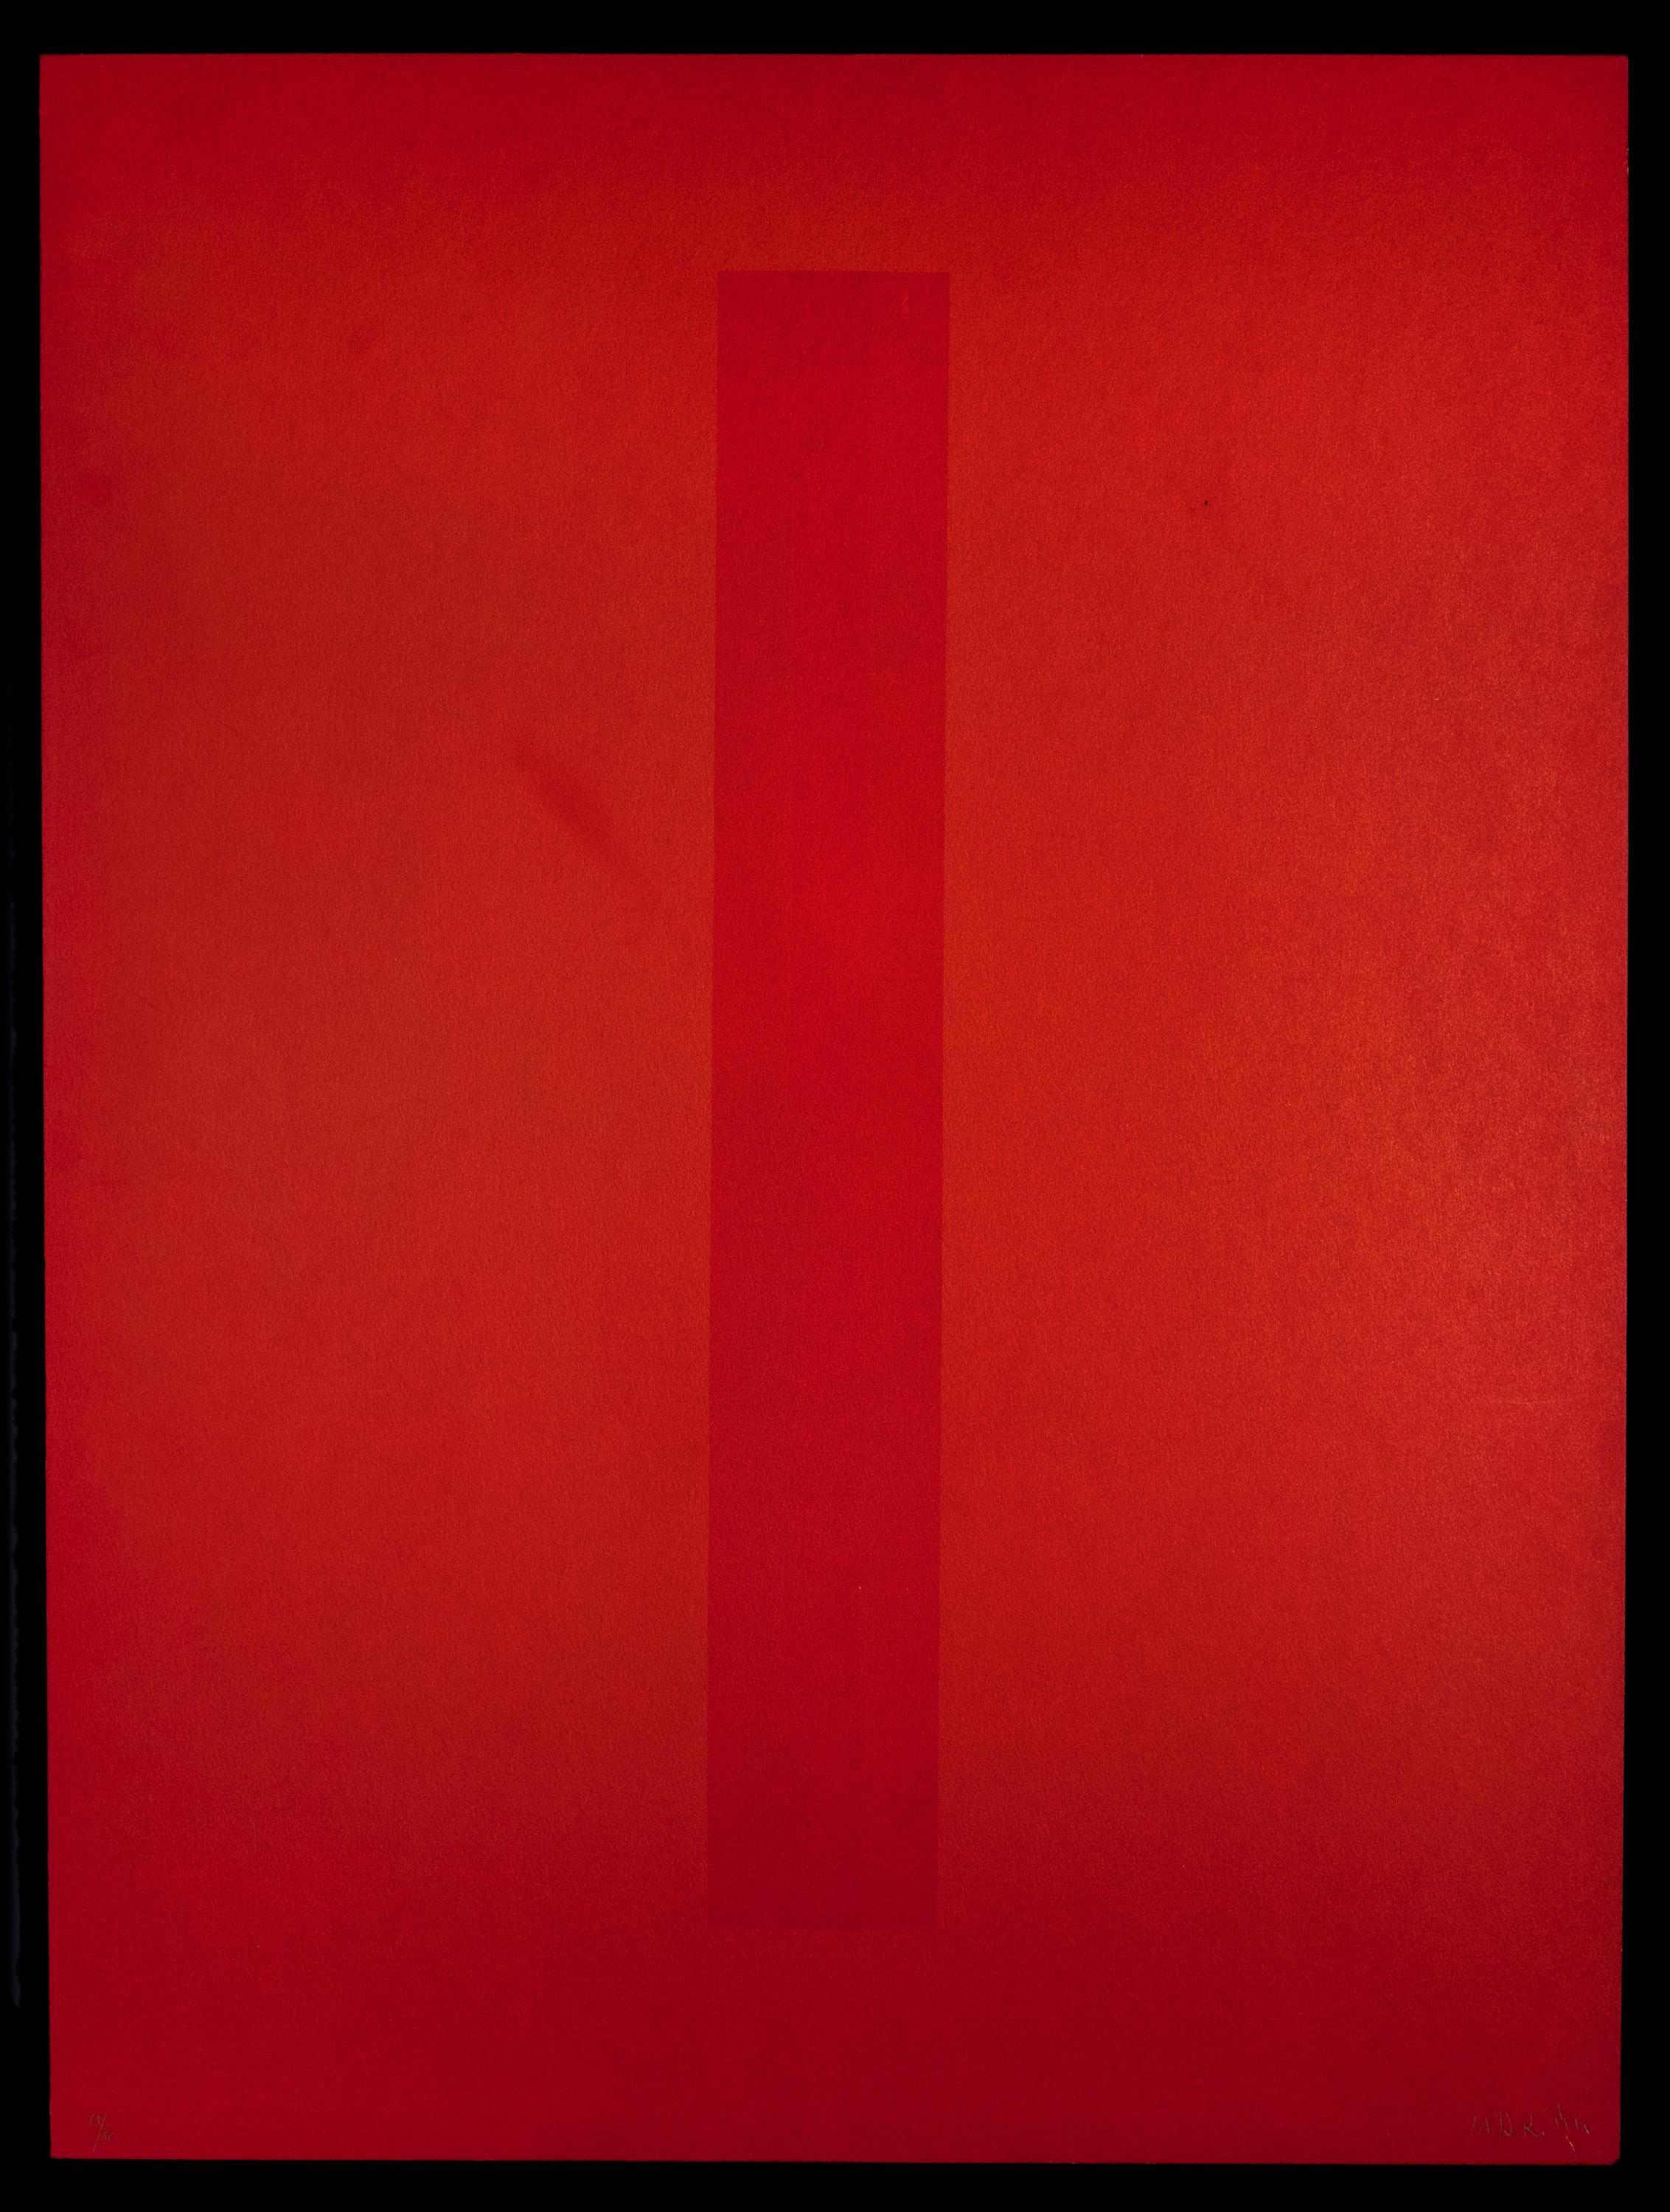 Lorenzo Indrimi , an Italian contemporary artist who drew inspiration from the most primitive human feelings, created this elegant sfumato lithograph Red Six IX in the 1970s.

It is a hand-signed edition of 90 prints.

Très bon état.